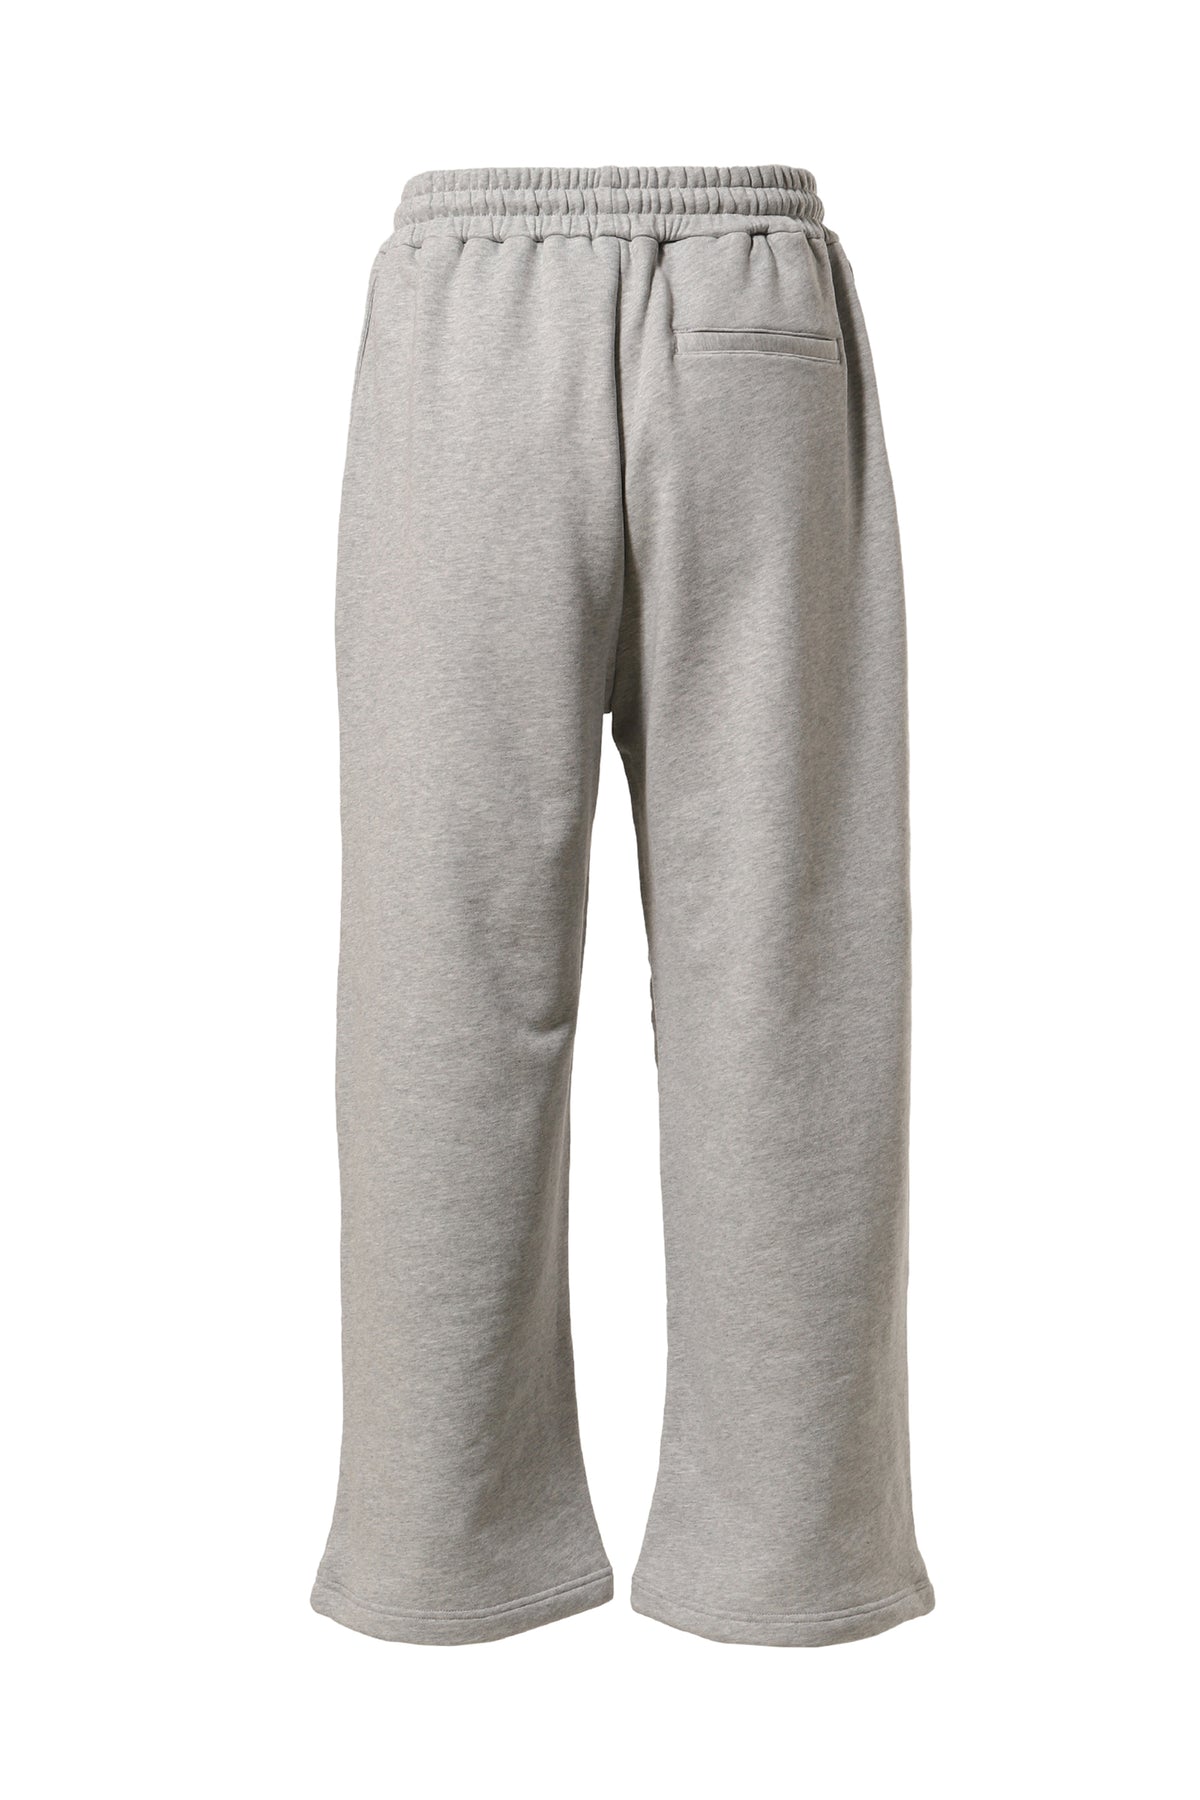 PANELLED STRAIGHT SWEATPANTS / GRY